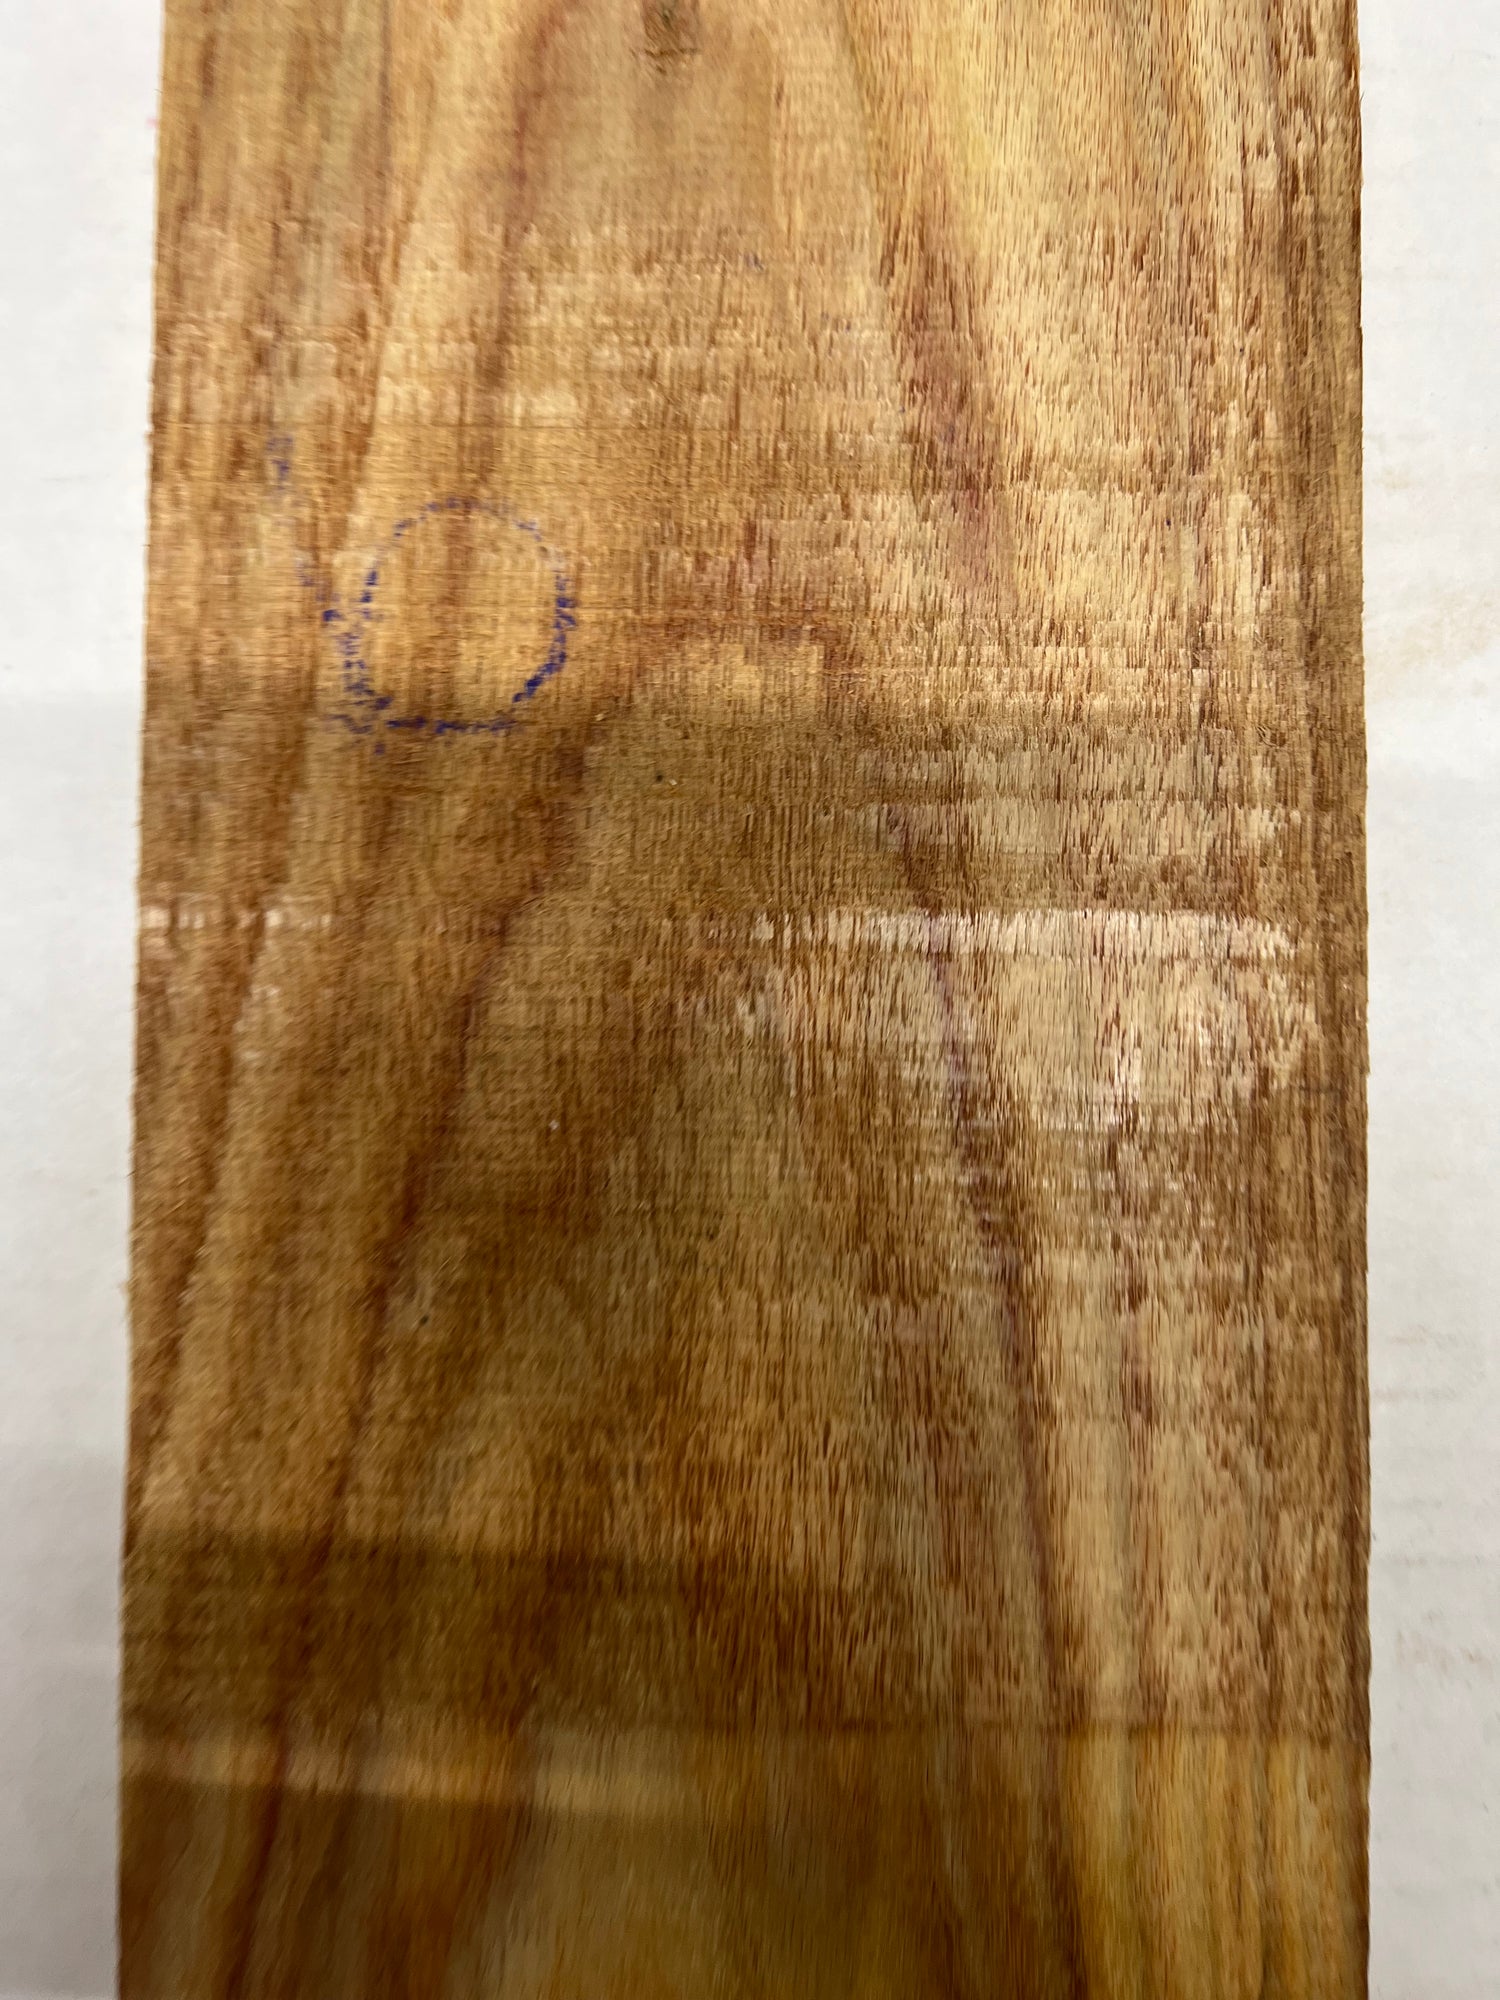 Canarywood  Lumber Board Square Wood Blank 32&quot;x5&quot;x1&quot; 